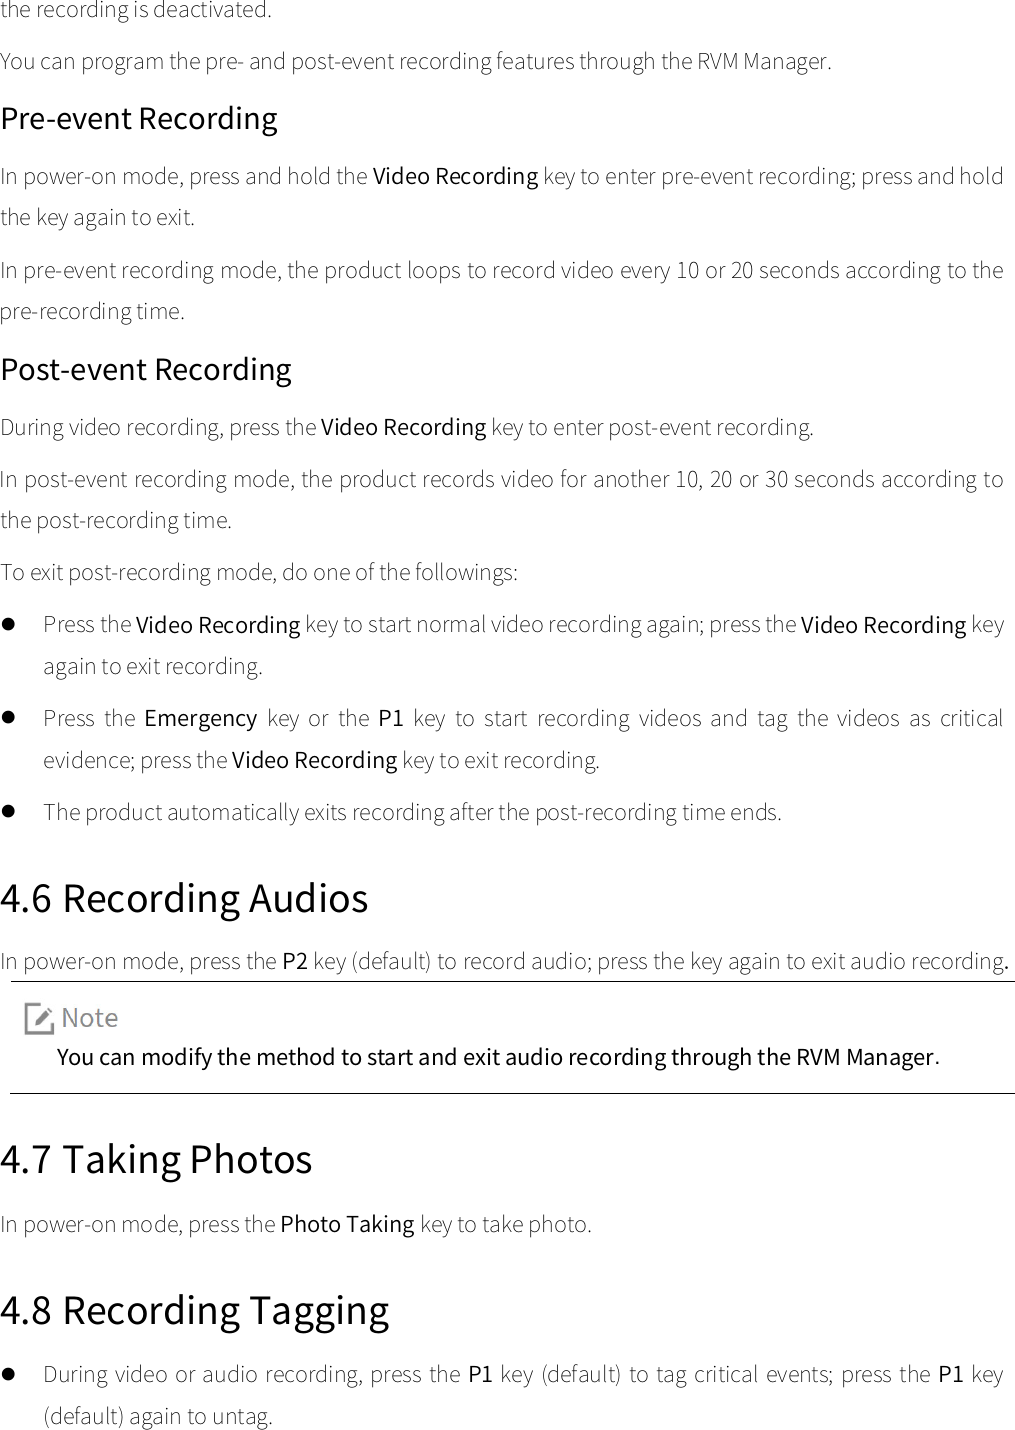  the recording is deactivated.   You can program the pre- and post-event recording features through the RVM Manager.   Pre-event Recording In power-on mode, press and hold the Video Recording key to enter pre-event recording; press and hold the key again to exit.  In pre-event recording mode, the product loops to record video every 10 or 20 seconds according to the pre-recording time.   Post-event Recording During video recording, press the Video Recording key to enter post-event recording.   In post-event recording mode, the product records video for another 10, 20 or 30 seconds according to the post-recording time.   To exit post-recording mode, do one of the followings:    Press the Video Recording key to start normal video recording again; press the Video Recording key again to exit recording.    Press  the  Emergency key  or  the  P1 key to  start  recording videos  and  tag  the  videos  as  critical evidence; press the Video Recording key to exit recording.    The product automatically exits recording after the post-recording time ends.   4.6 Recording Audios In power-on mode, press the P2 key (default) to record audio; press the key again to exit audio recording. You can modify the method to start and exit audio recording through the RVM Manager.   4.7 Taking Photos In power-on mode, press the Photo Taking key to take photo.   4.8 Recording Tagging  During video or audio recording, press the P1 key (default) to tag critical events; press the P1 key (default) again to untag.   